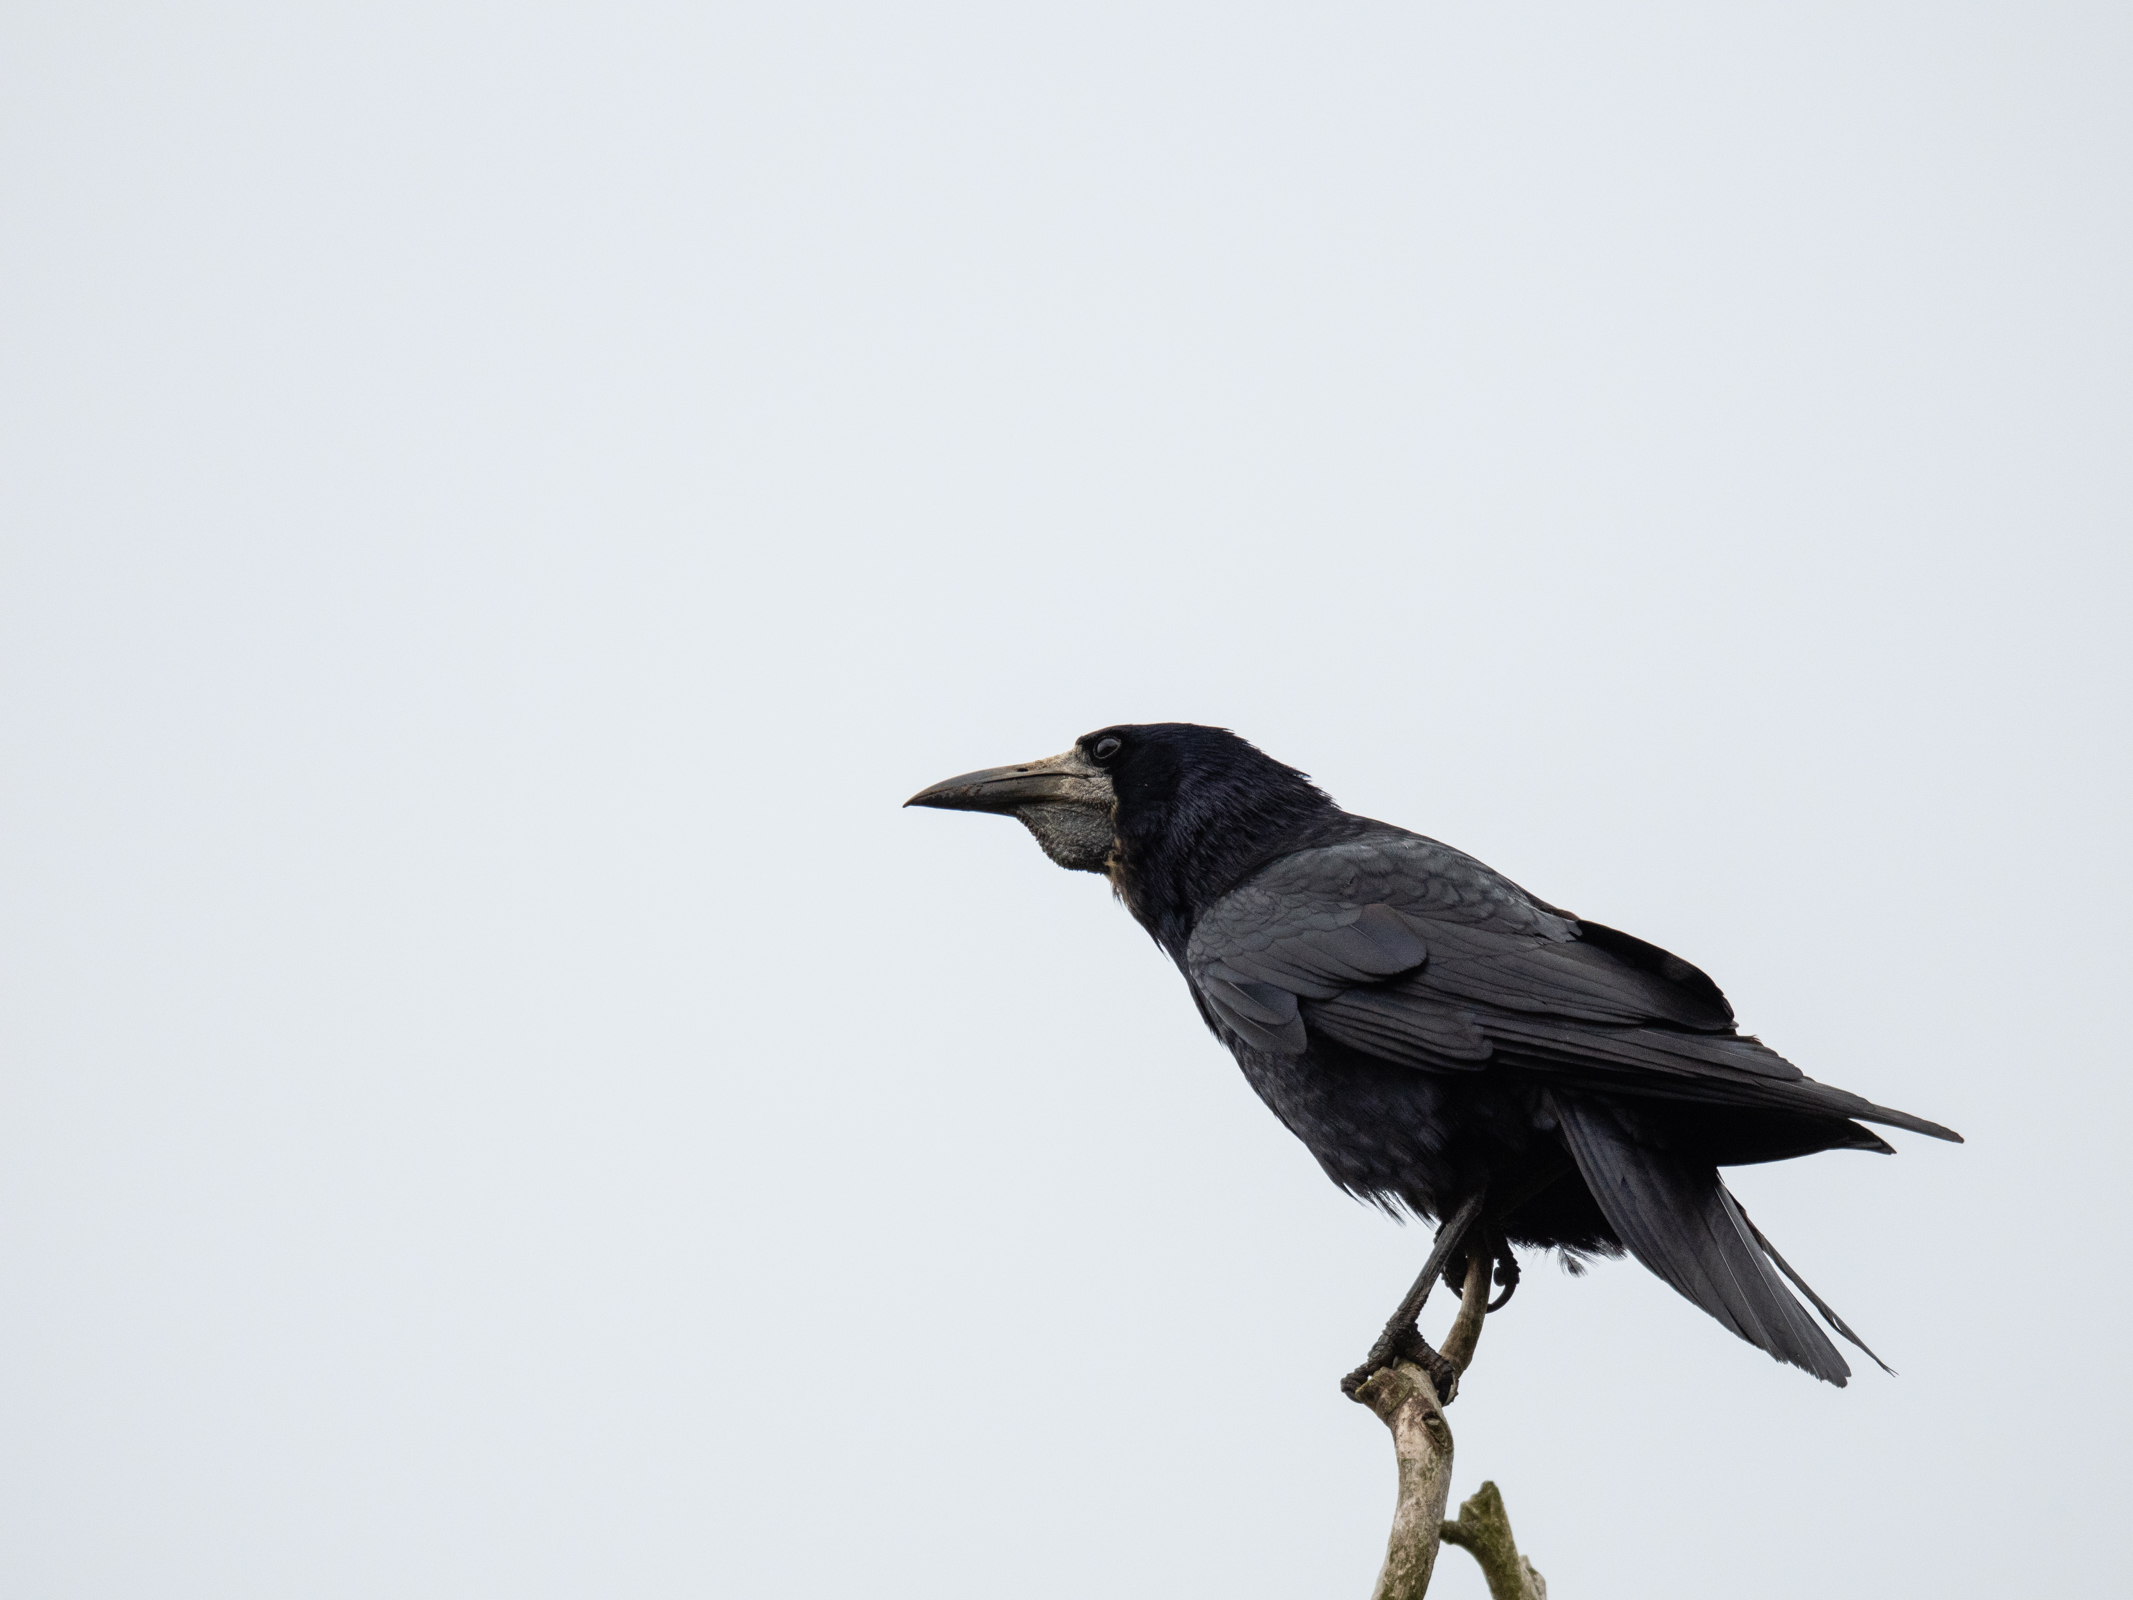 Photo of a crow taken with the OM System M.Zuiko Digital 150-600mm F5.0-6.3 IS